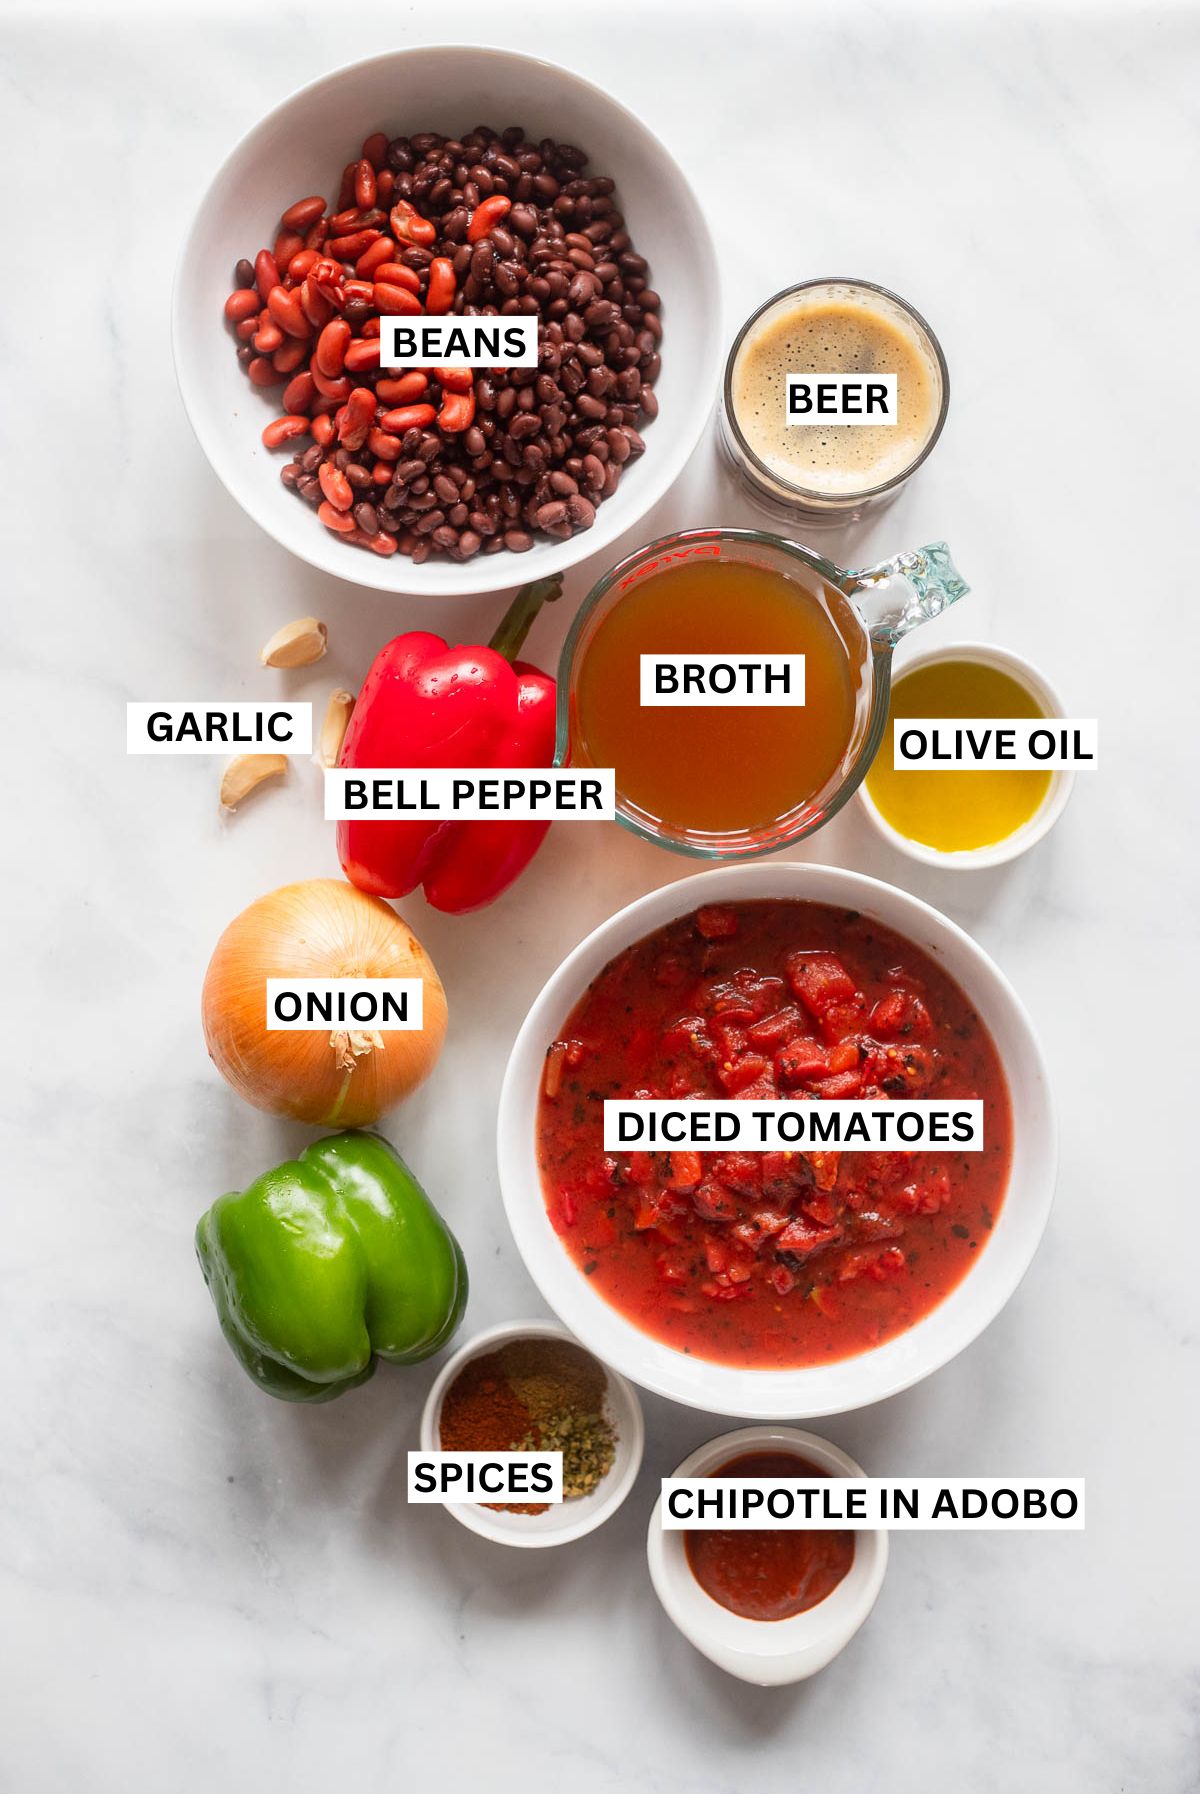 Vegetarian chipotle chili ingredients in small bowls. Each ingredient is labelled with text.